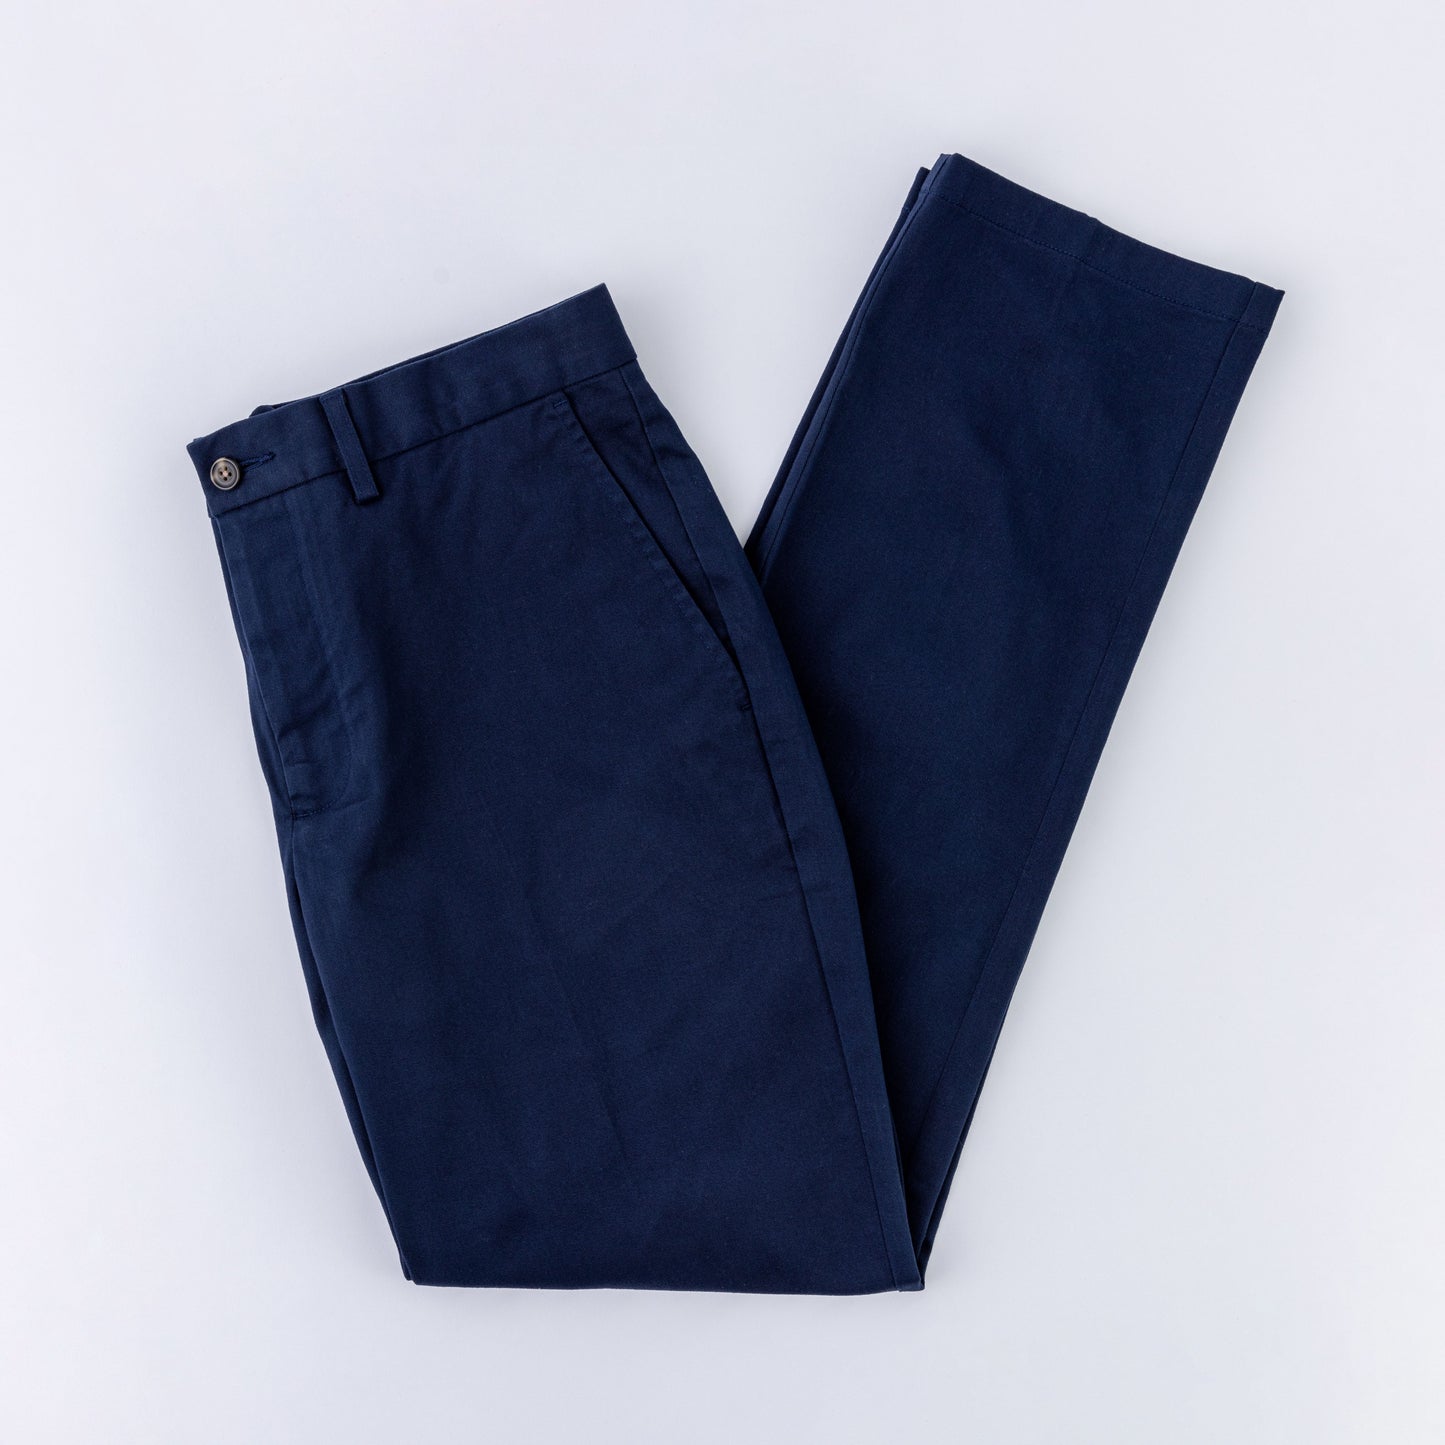 Comfort Cotton Twill Pant - Available in 3 Colors